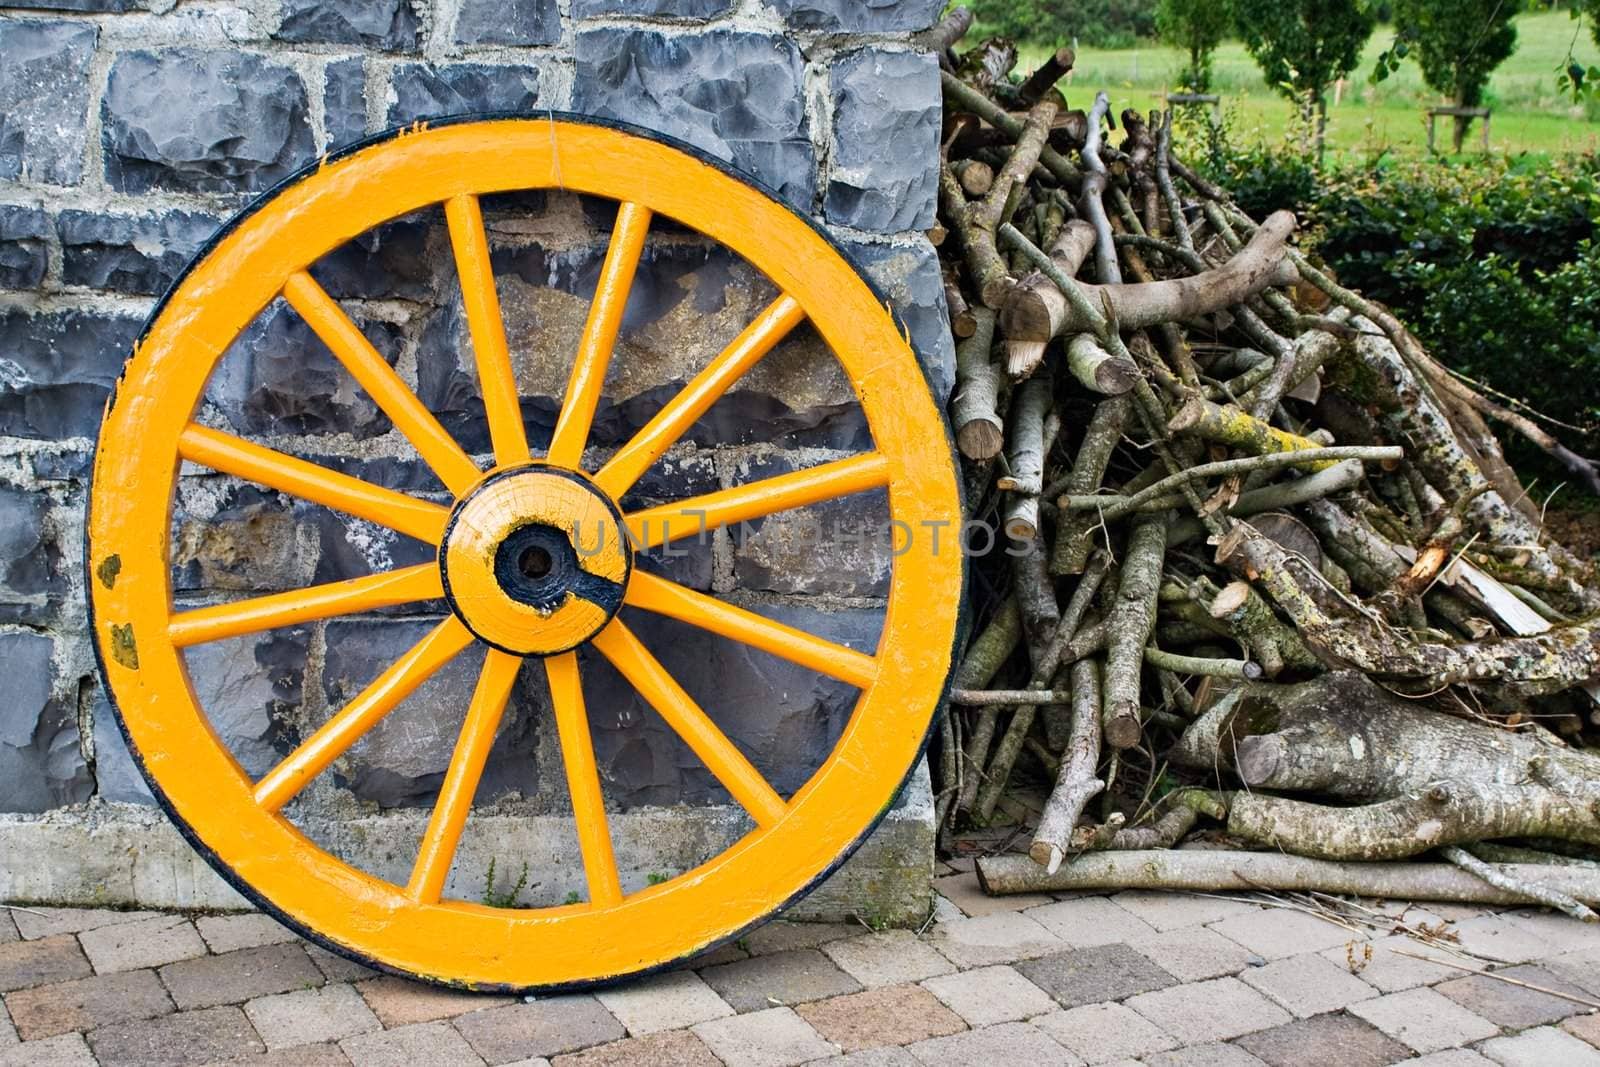 An old antique yellow wooden wagon wheel leaning against a stone wall. There is a pile of tree branches laying next to it.